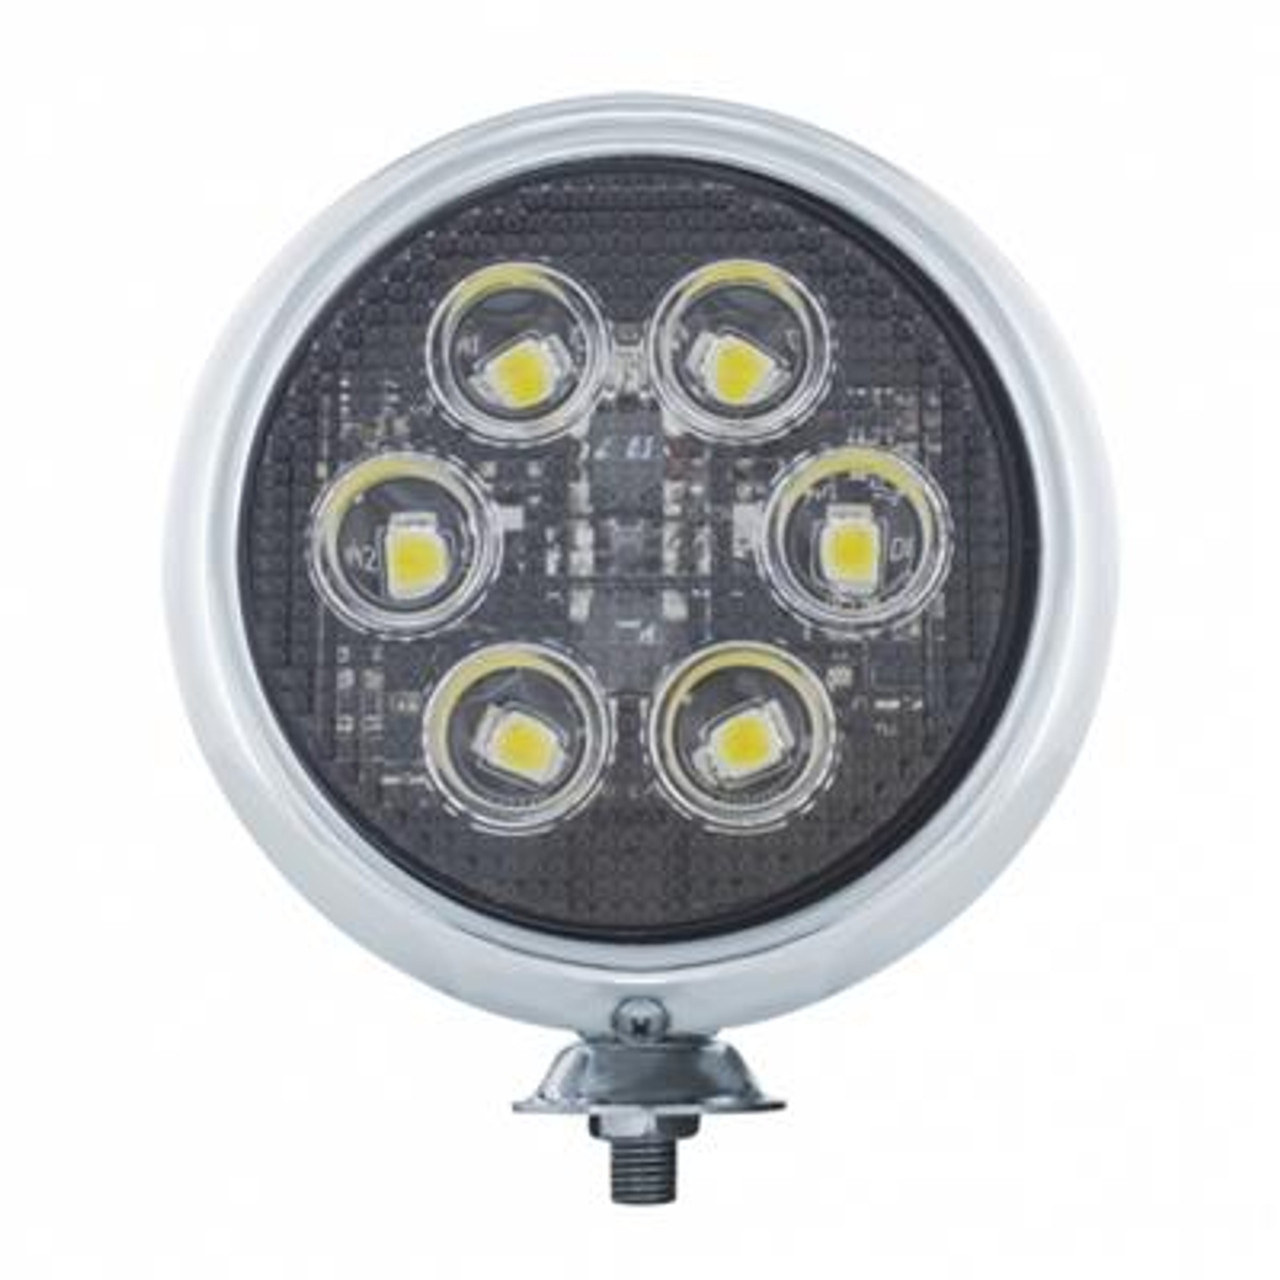 Not only do LEDs look better and brighter, but they also last way longer than their incandescent counterparts. Outfitting your big rig with LEDs will allow other drivers to see you better at night while lighting the road better than before.